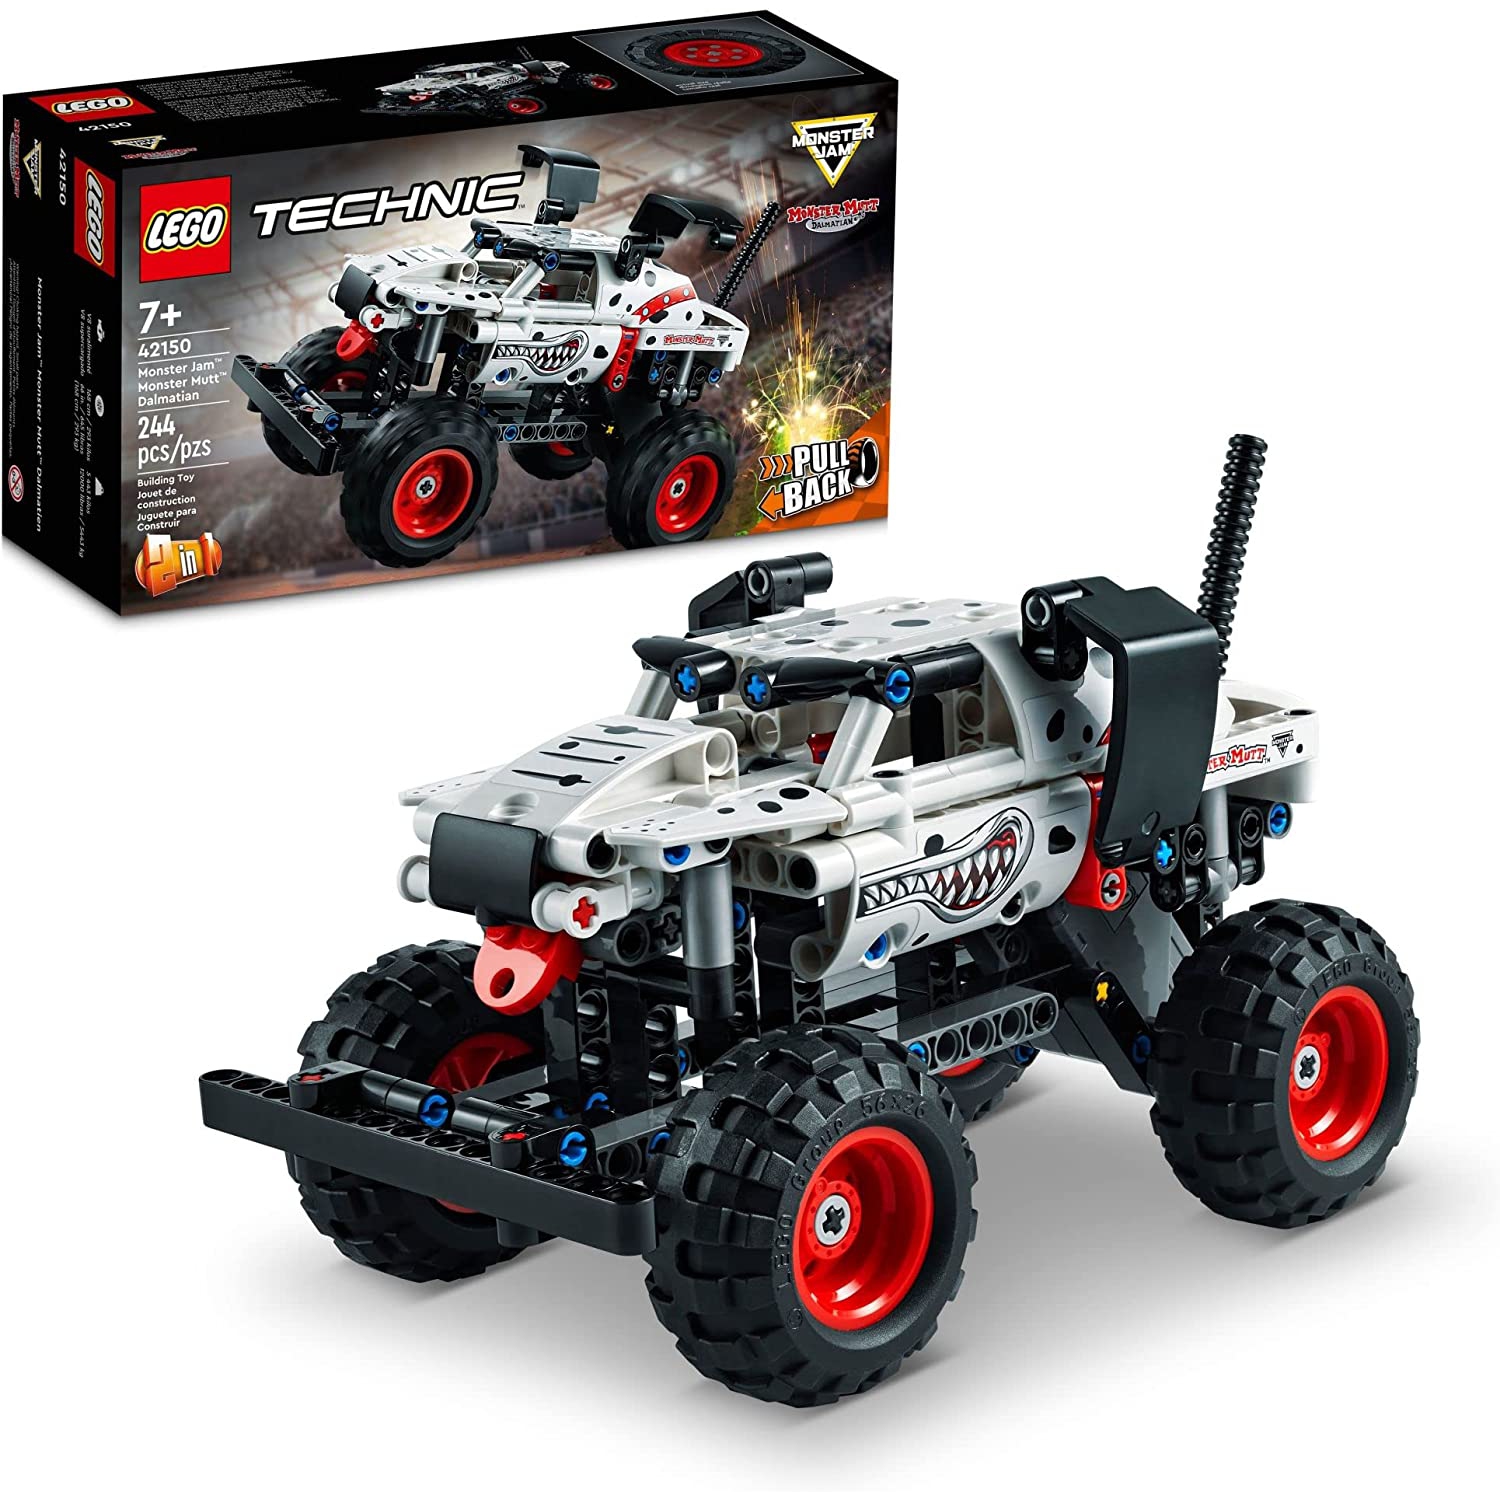 NEW MODEL 2023LEGO Technic Monster Jam Monster Mutt Dalmatian 42150 2-in-1 Building Toy Set for Kids, Boys, and Girls Ages 7+ (244 Pieces)